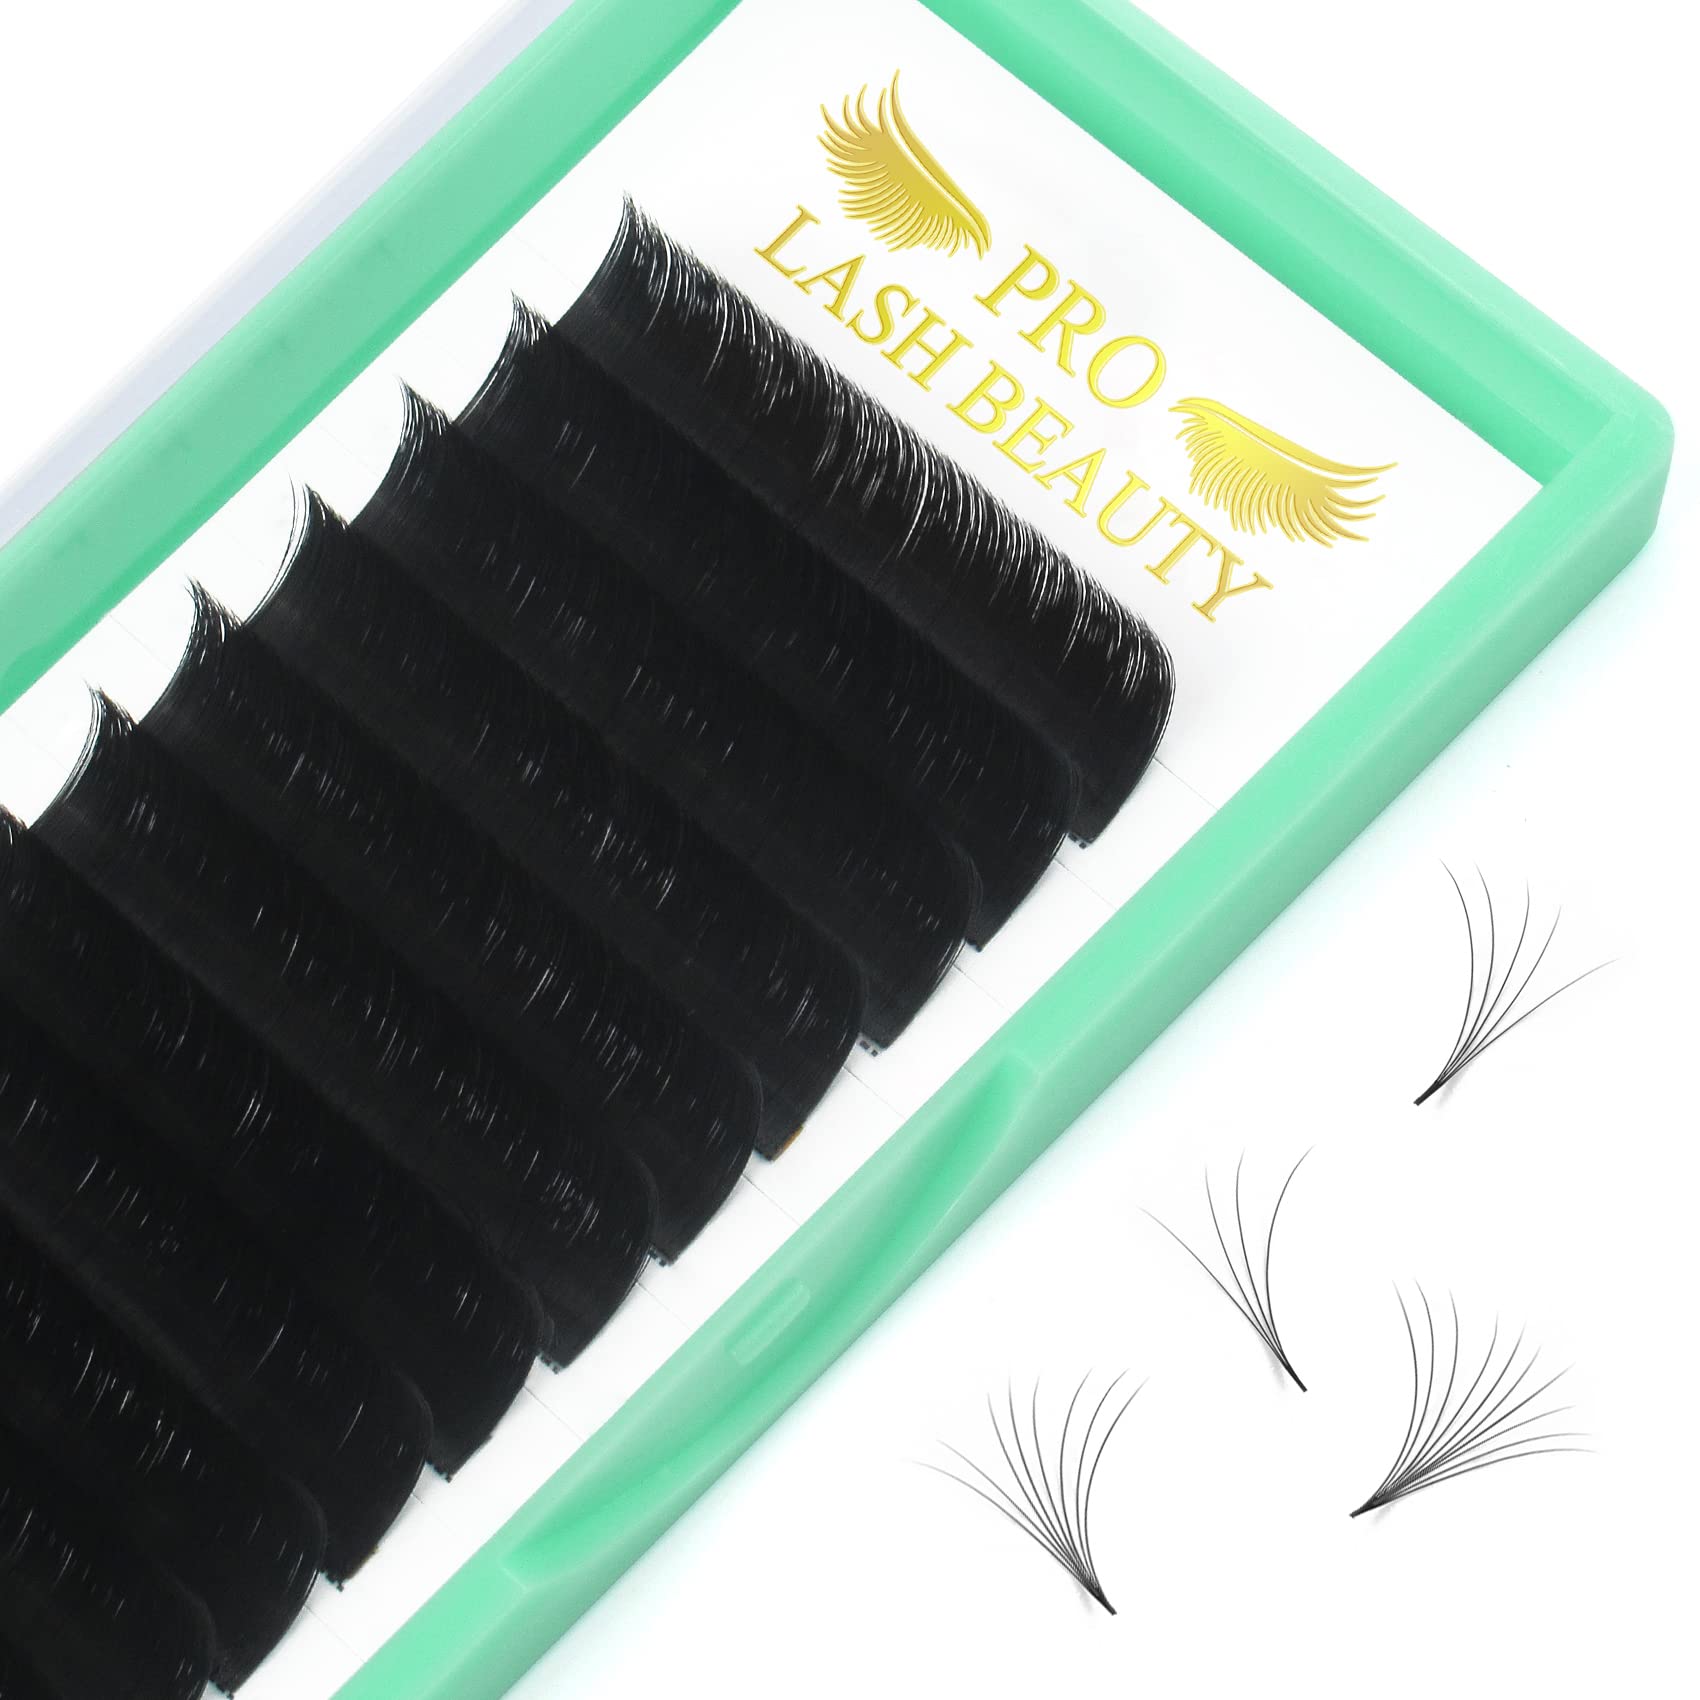 PRO LASHBEAUTY Easy Fan Volume Lashes cc-007-14 Volume Lash Extensions Rapid Blooming Lashes 9 to 20 mm Mega Volume Lash Extensions c D curl Fl